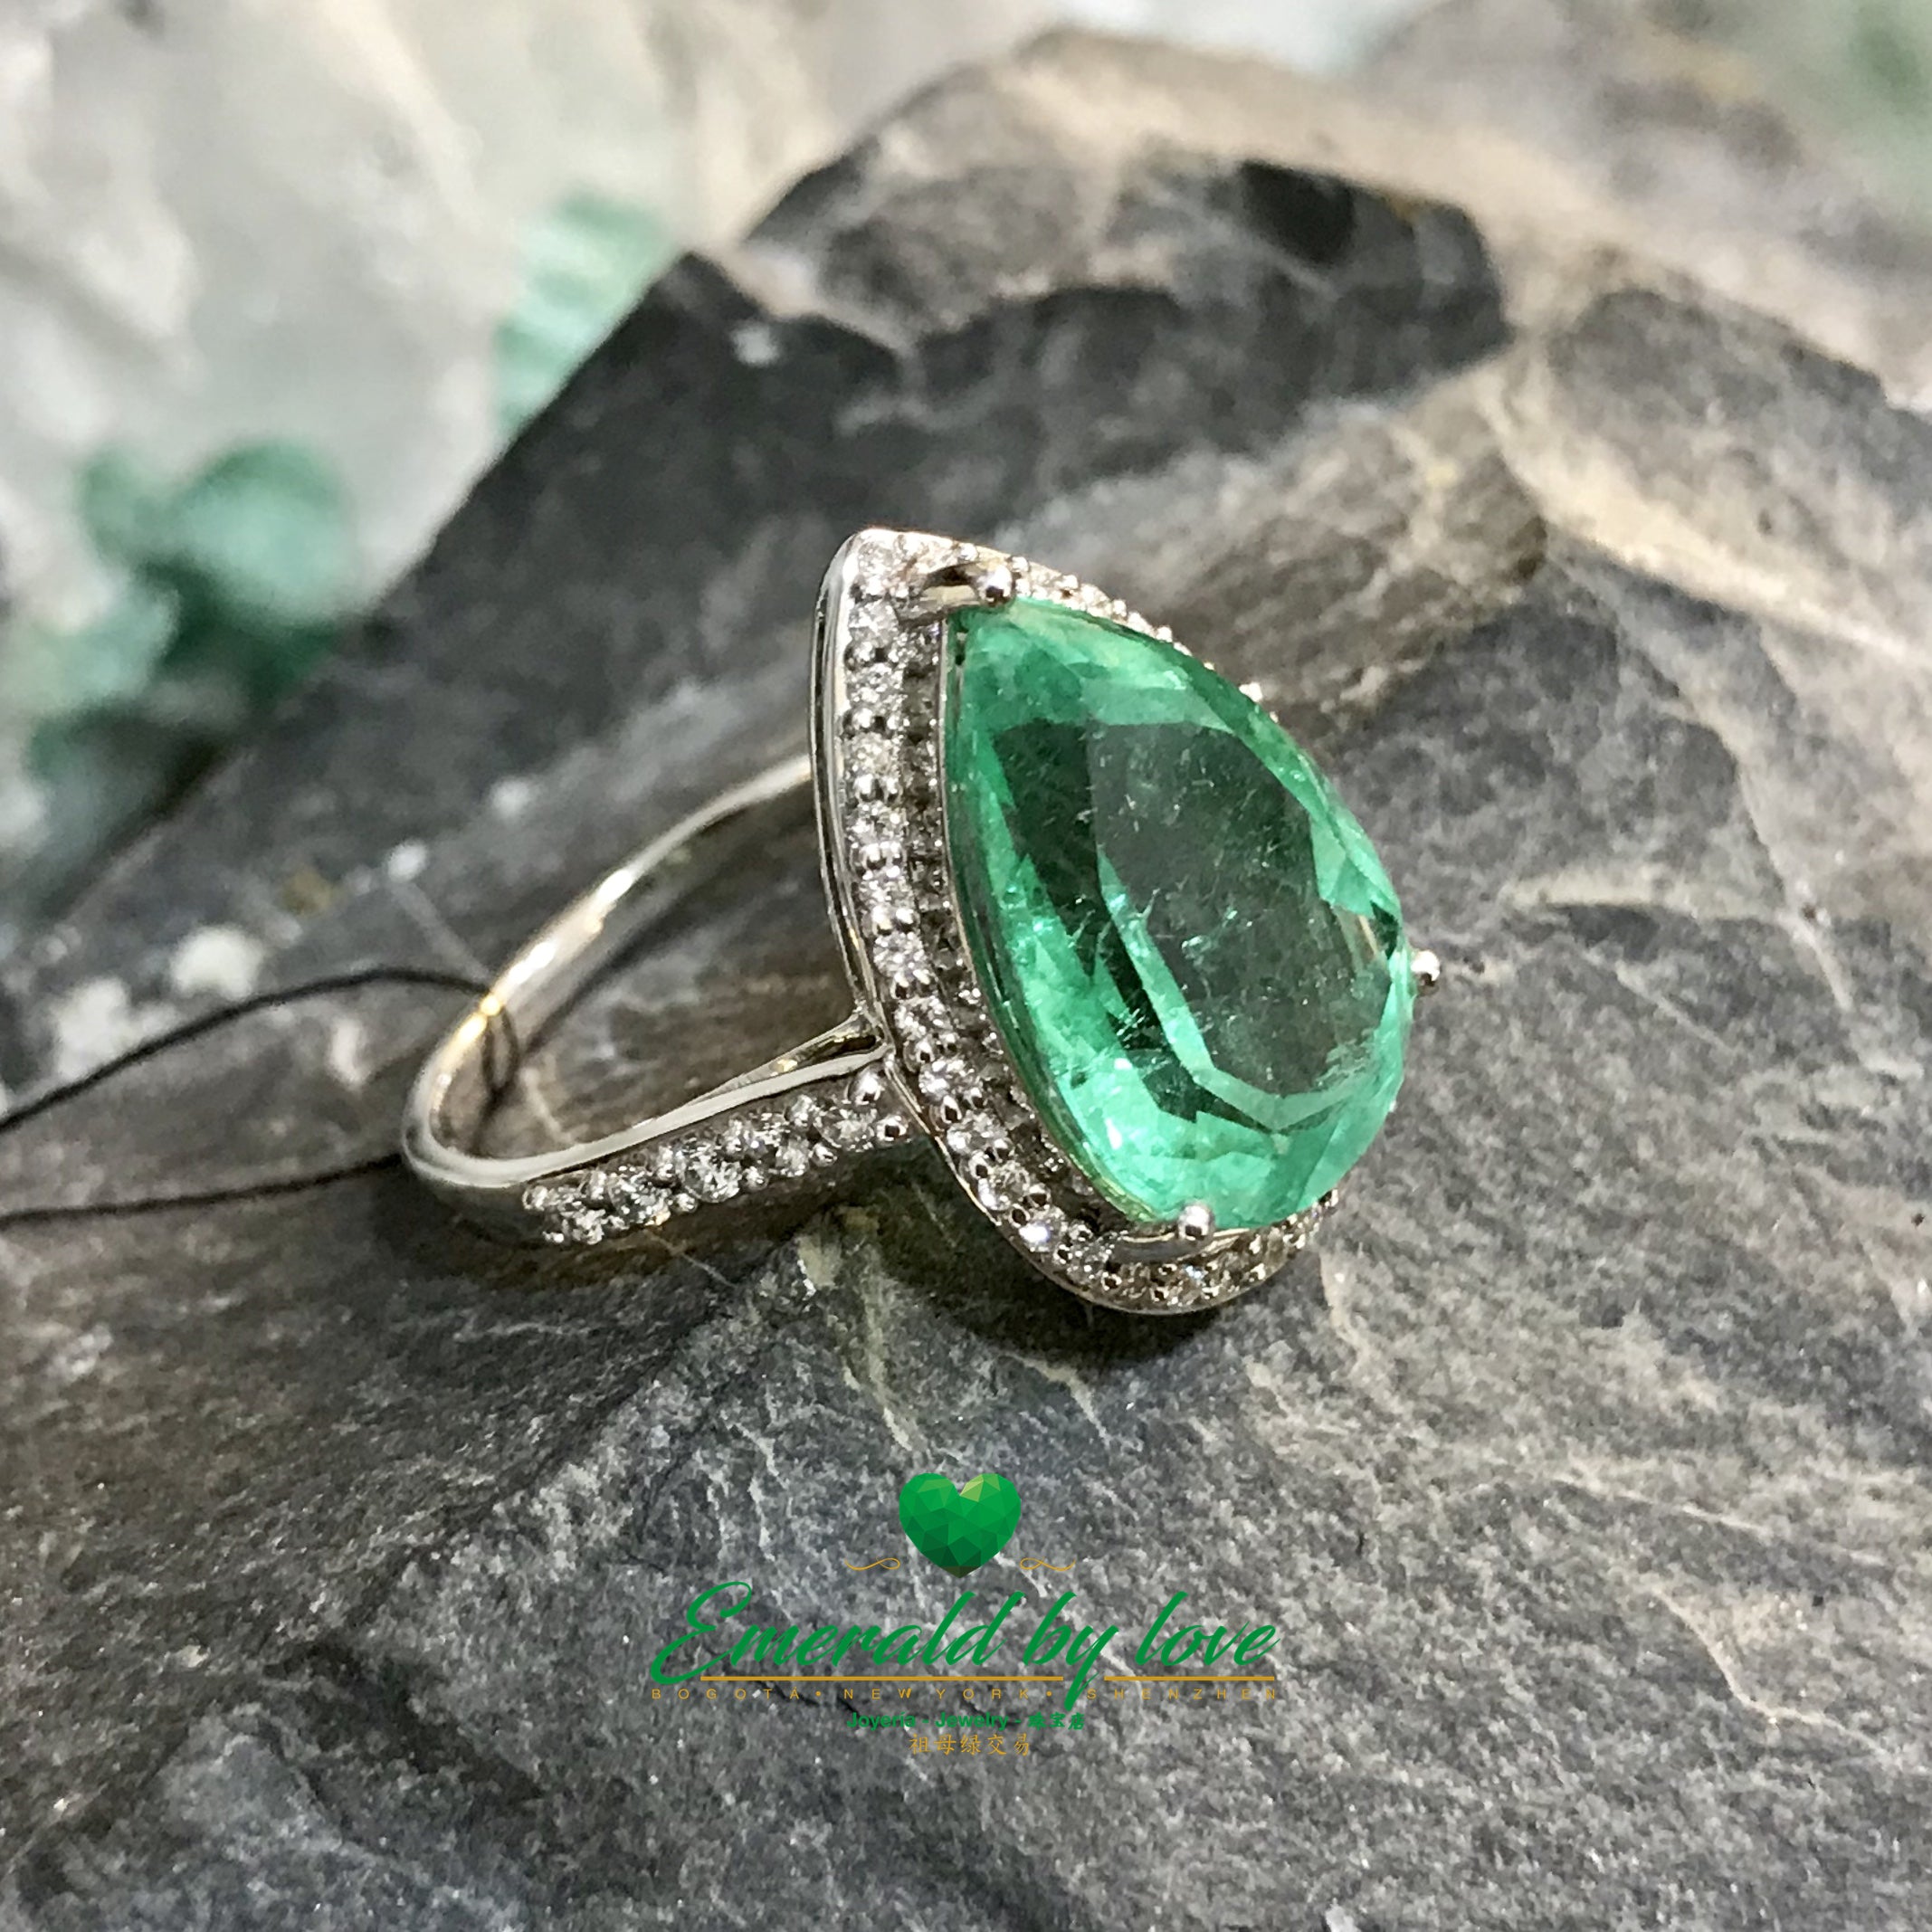 Sparkling Teardrop Halo Colombian Emerald Ring in 18k White Gold